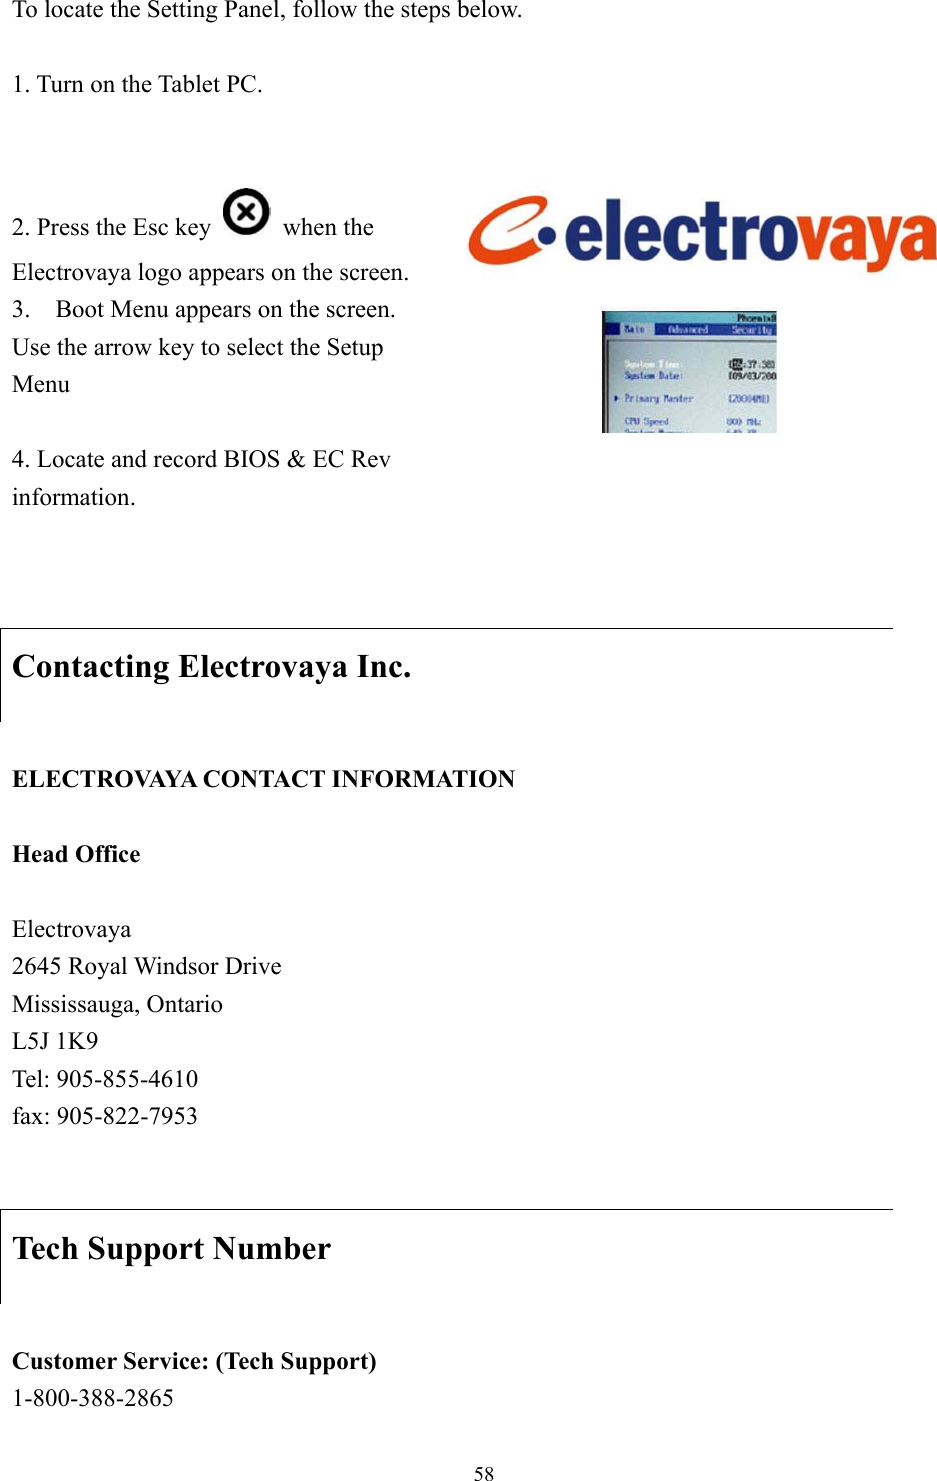 To locate the Setting Panel, follow the steps below.    1. Turn on the Tablet PC.    2. Press the Esc key   when the Electrovaya logo appears on the screen. 3.    Boot Menu appears on the screen.   Use the arrow key to select the Setup Menu   4. Locate and record BIOS &amp; EC Rev information.     Contacting Electrovaya Inc.  ELECTROVAYA CONTACT INFORMATION  Head Office  Electrovaya 2645 Royal Windsor Drive Mississauga, Ontario L5J 1K9 Tel: 905-855-4610 fax: 905-822-7953   Tech Support Number  Customer Service: (Tech Support) 1-800-388-2865  58